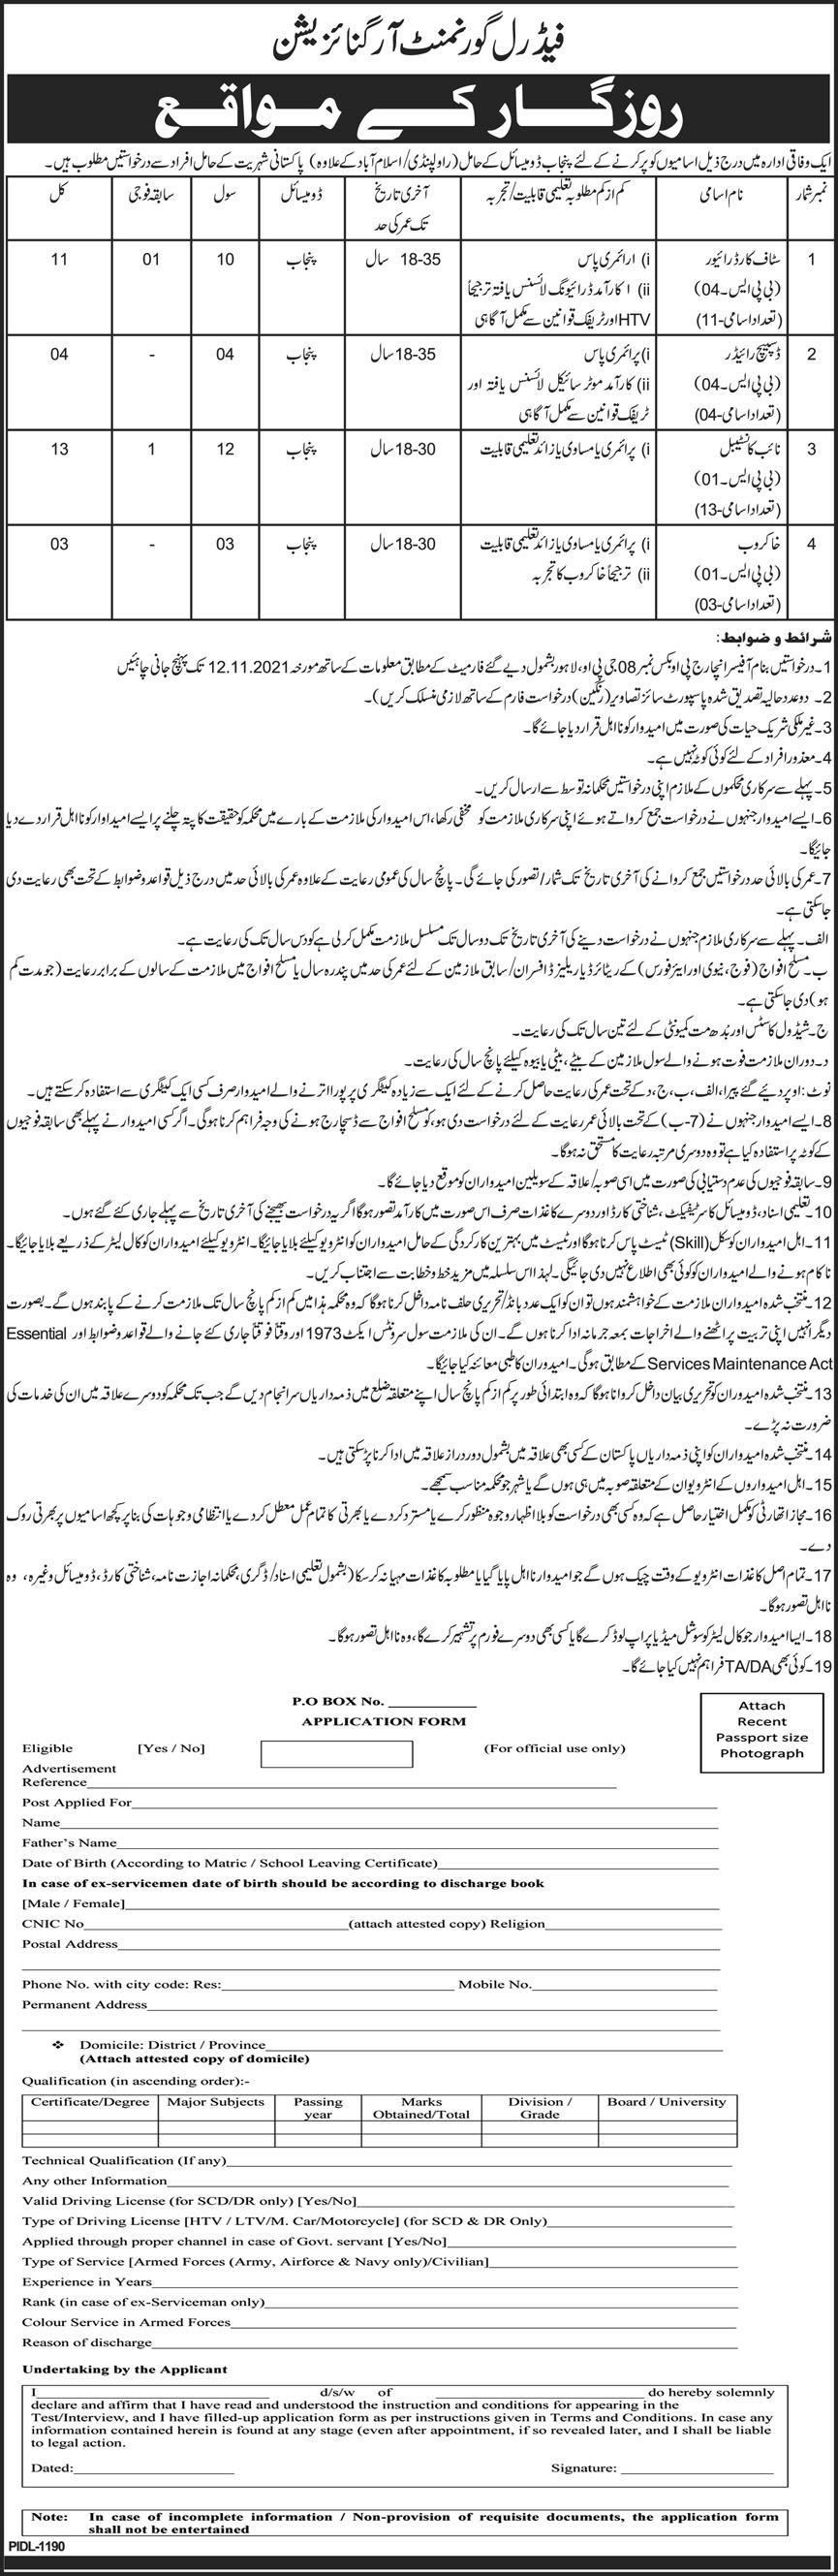 FEDERAL GOVERNMENT ORGANIZATION JOBS 2021